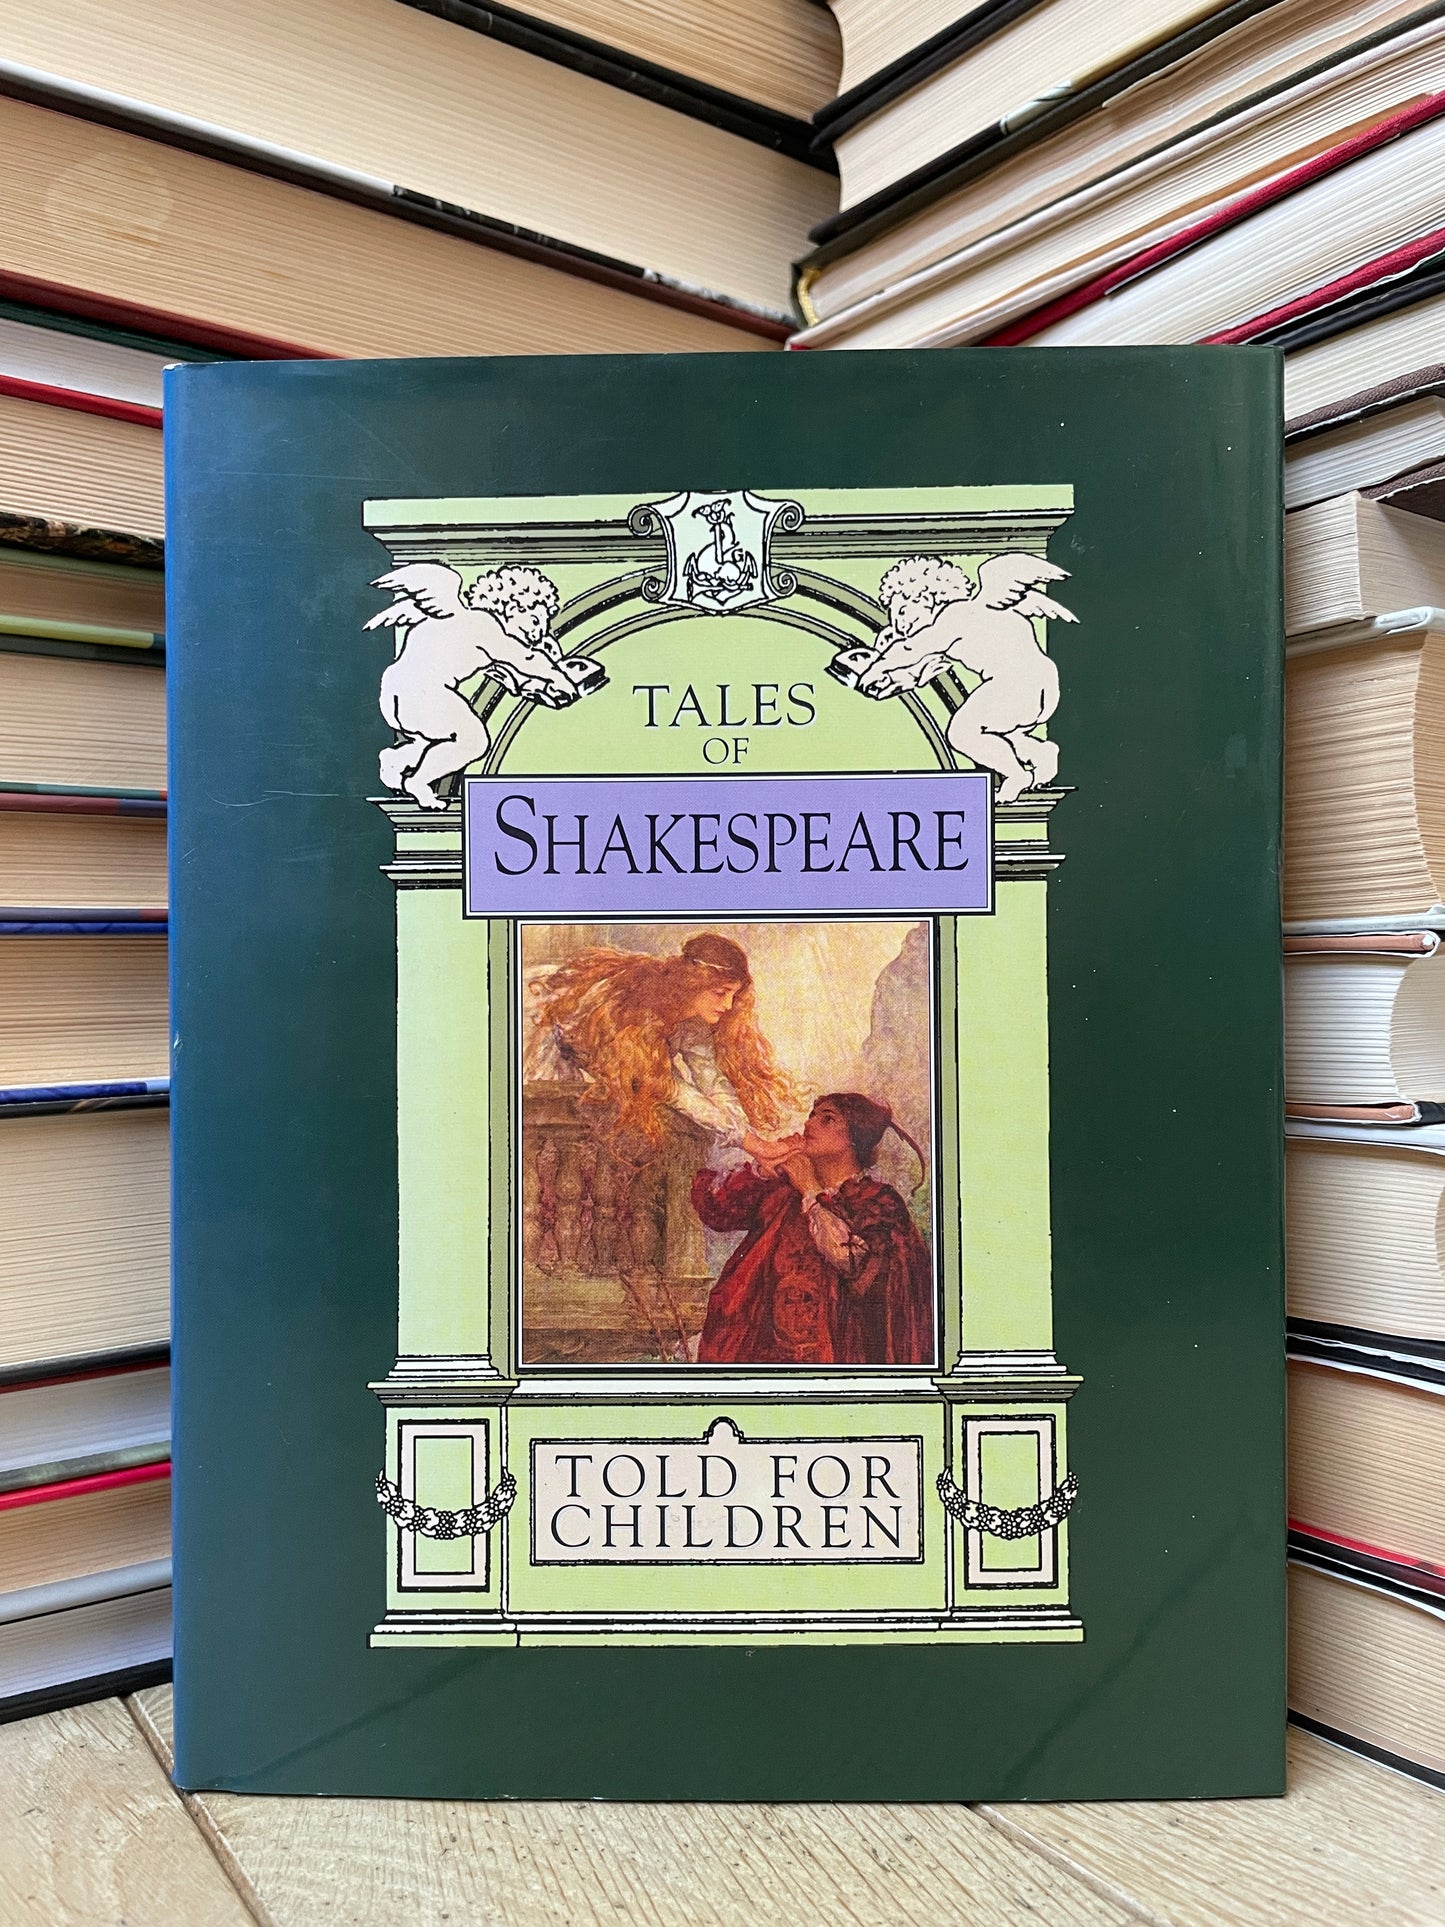 Tales of Shakespeare Told for Children